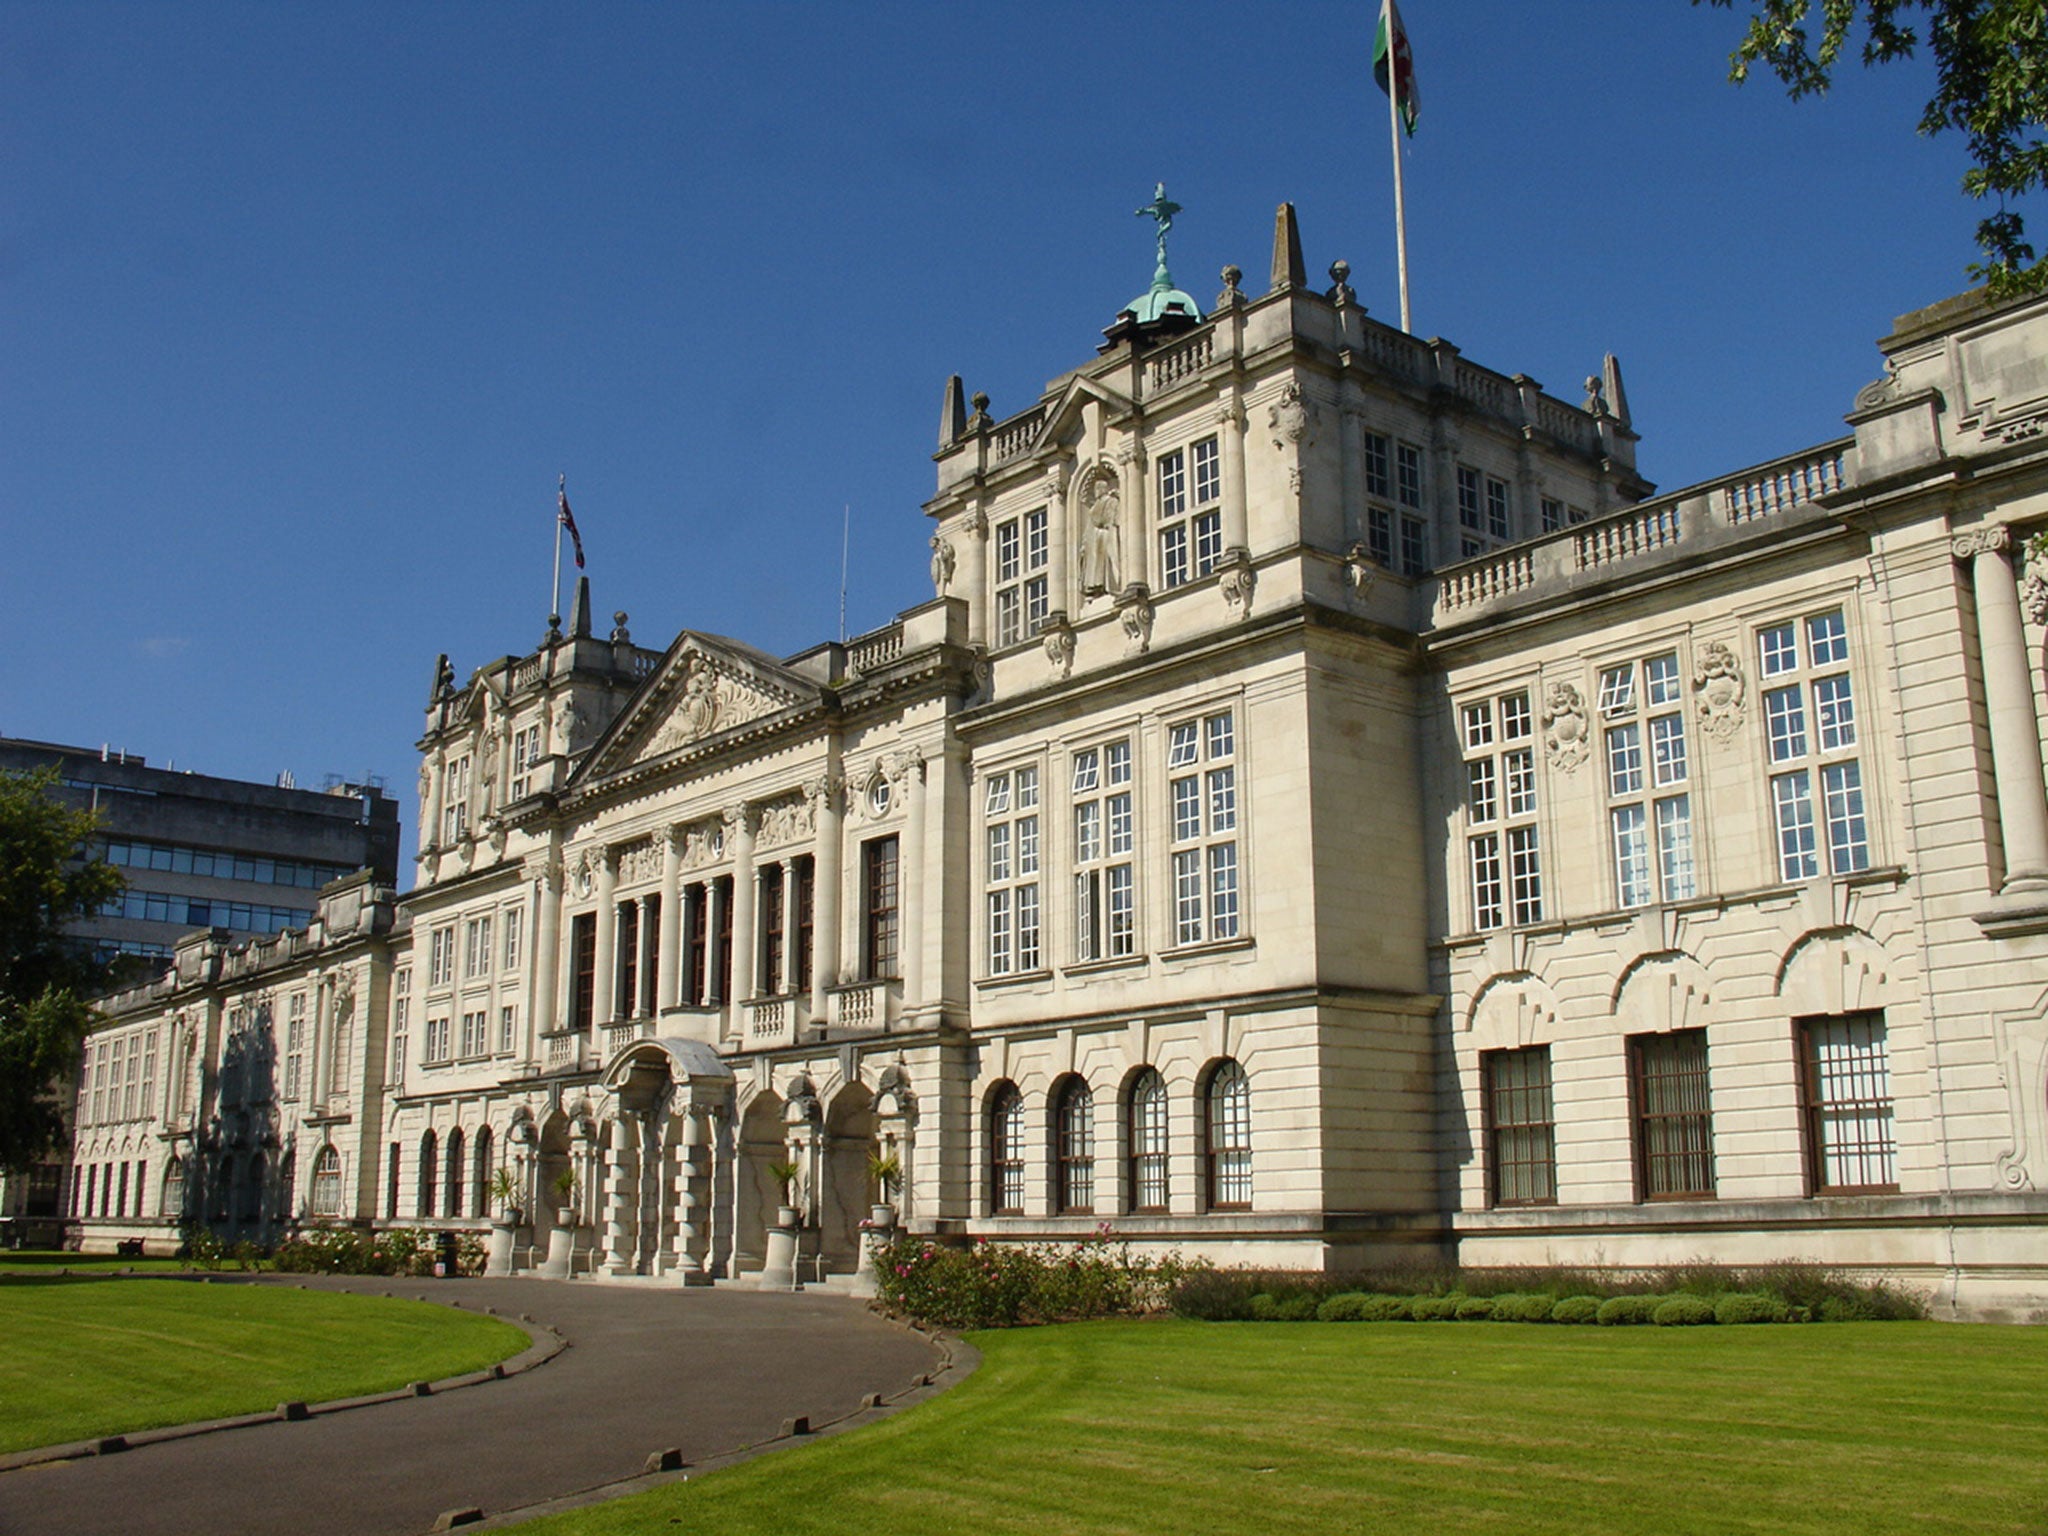 The main building of Cardiff University